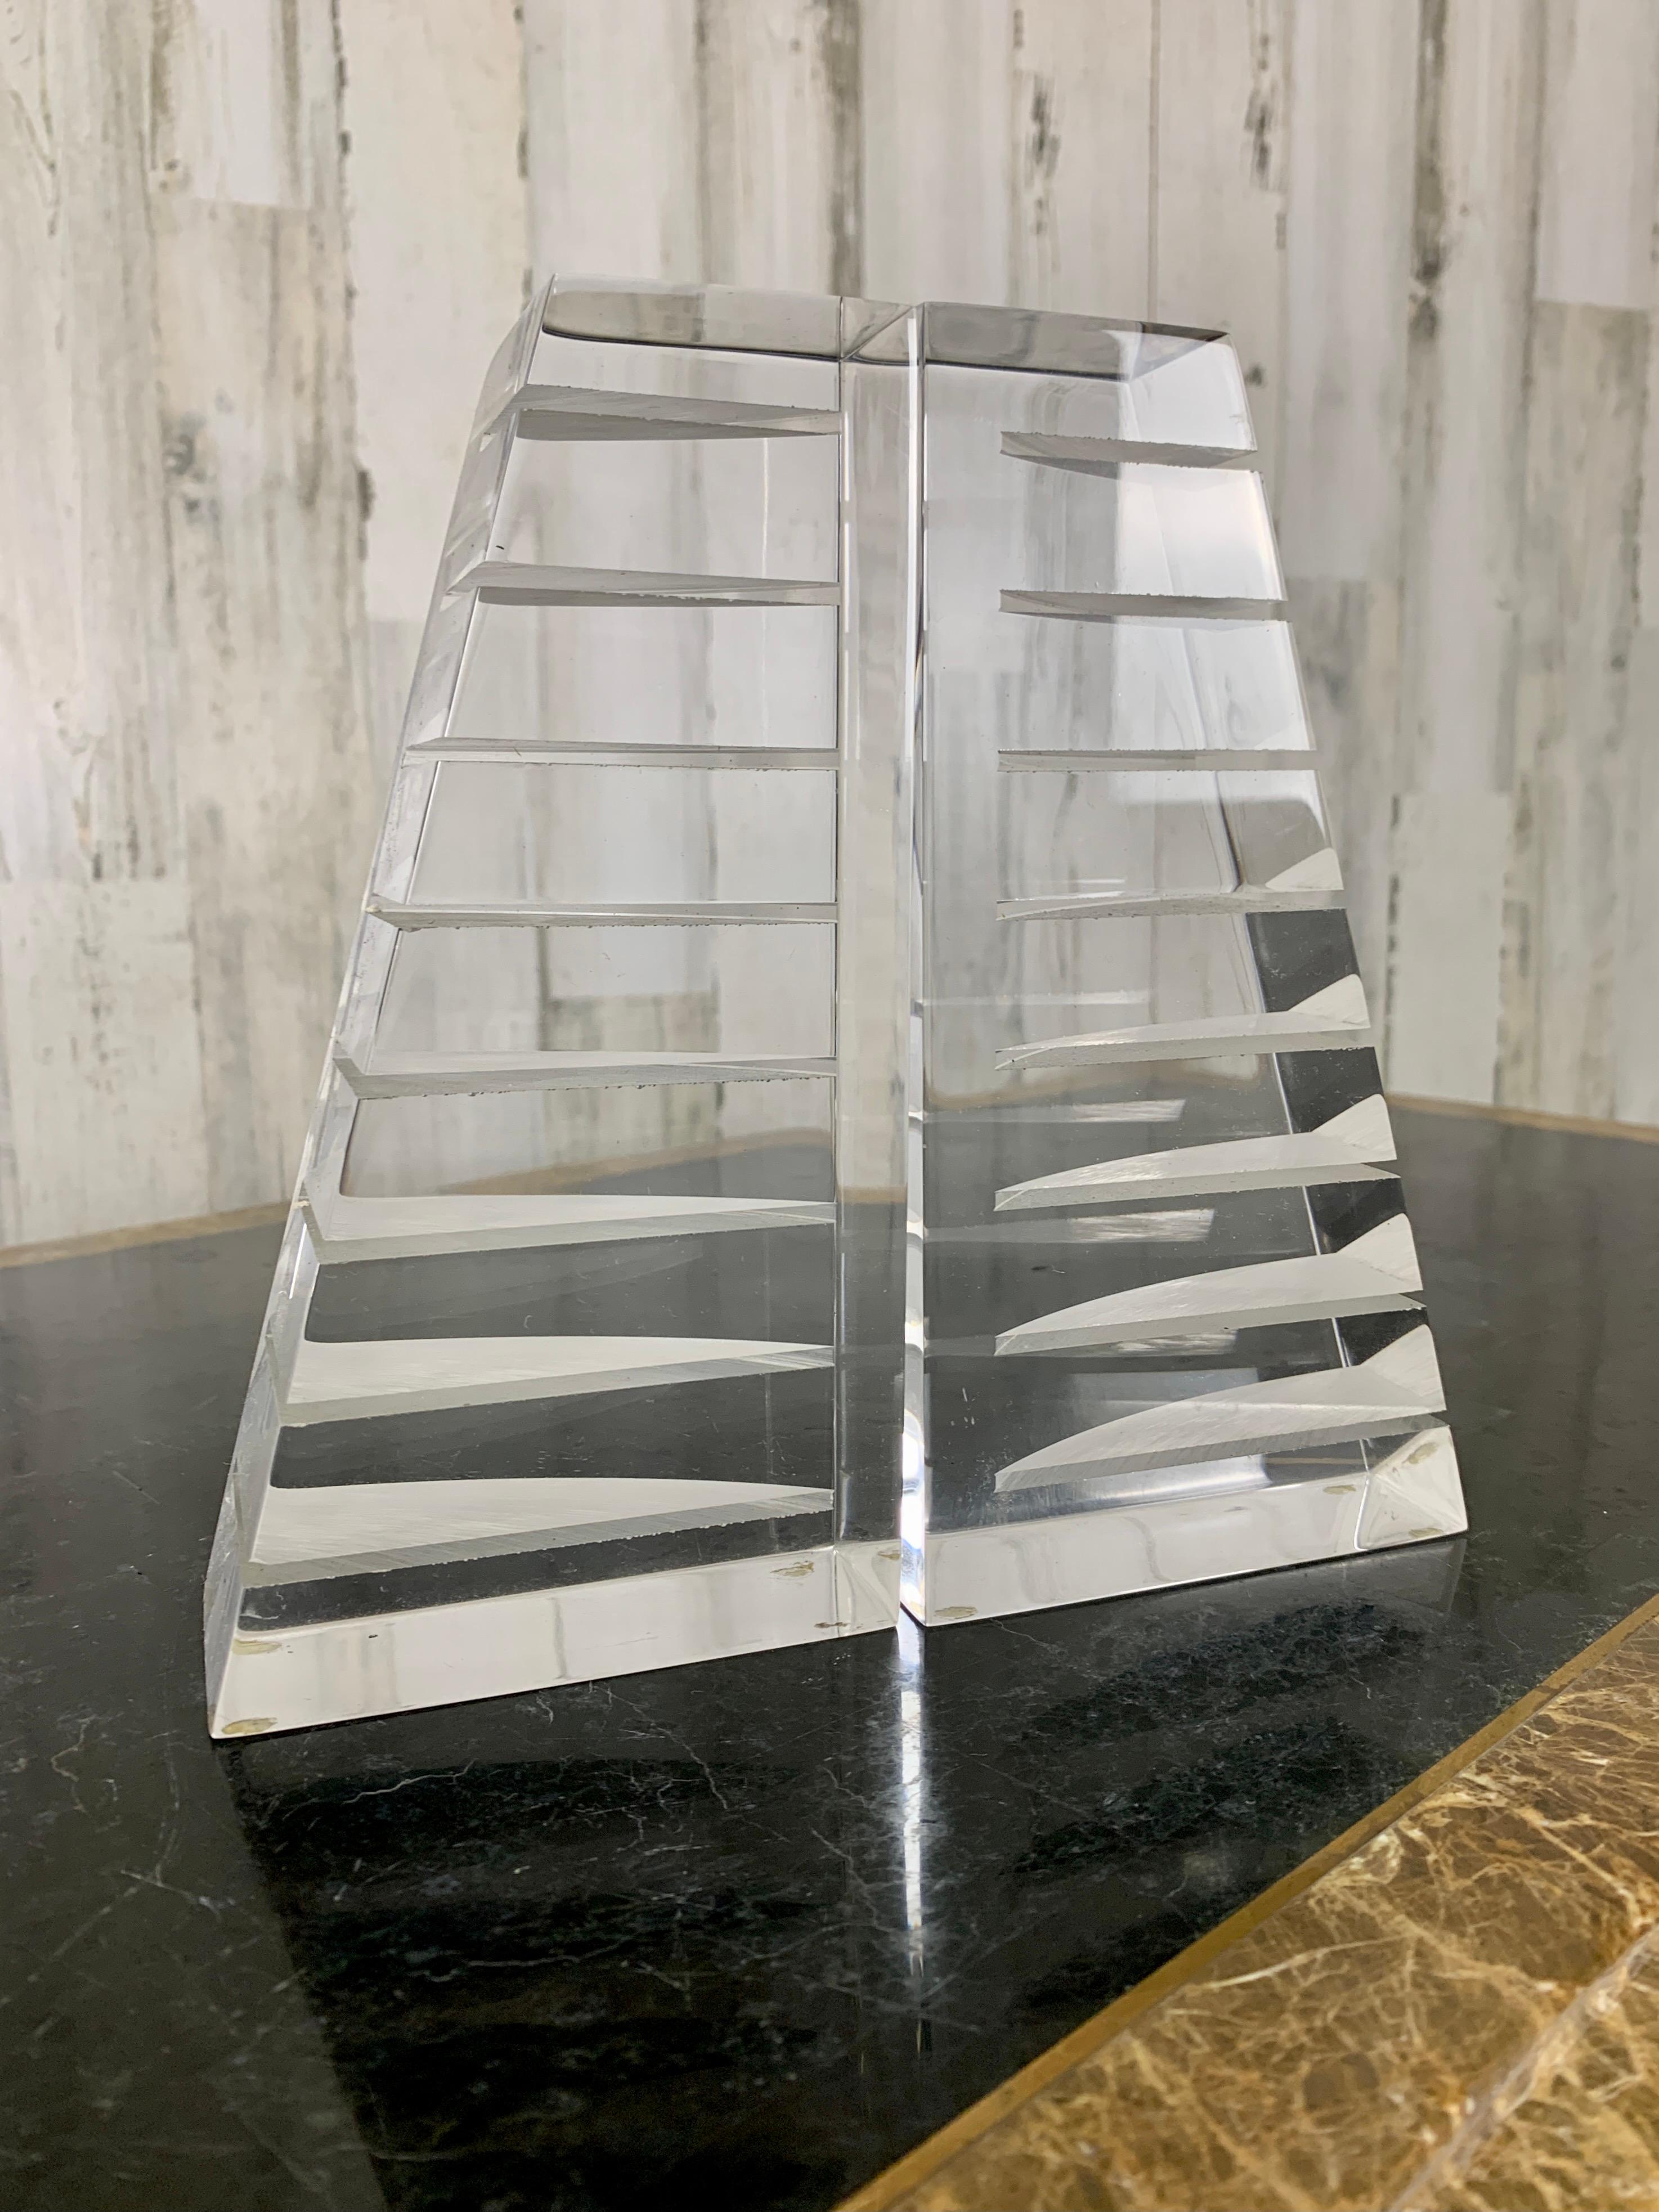 Lucite bookends by Herb Ritts for Astrolite, circa 1970s.